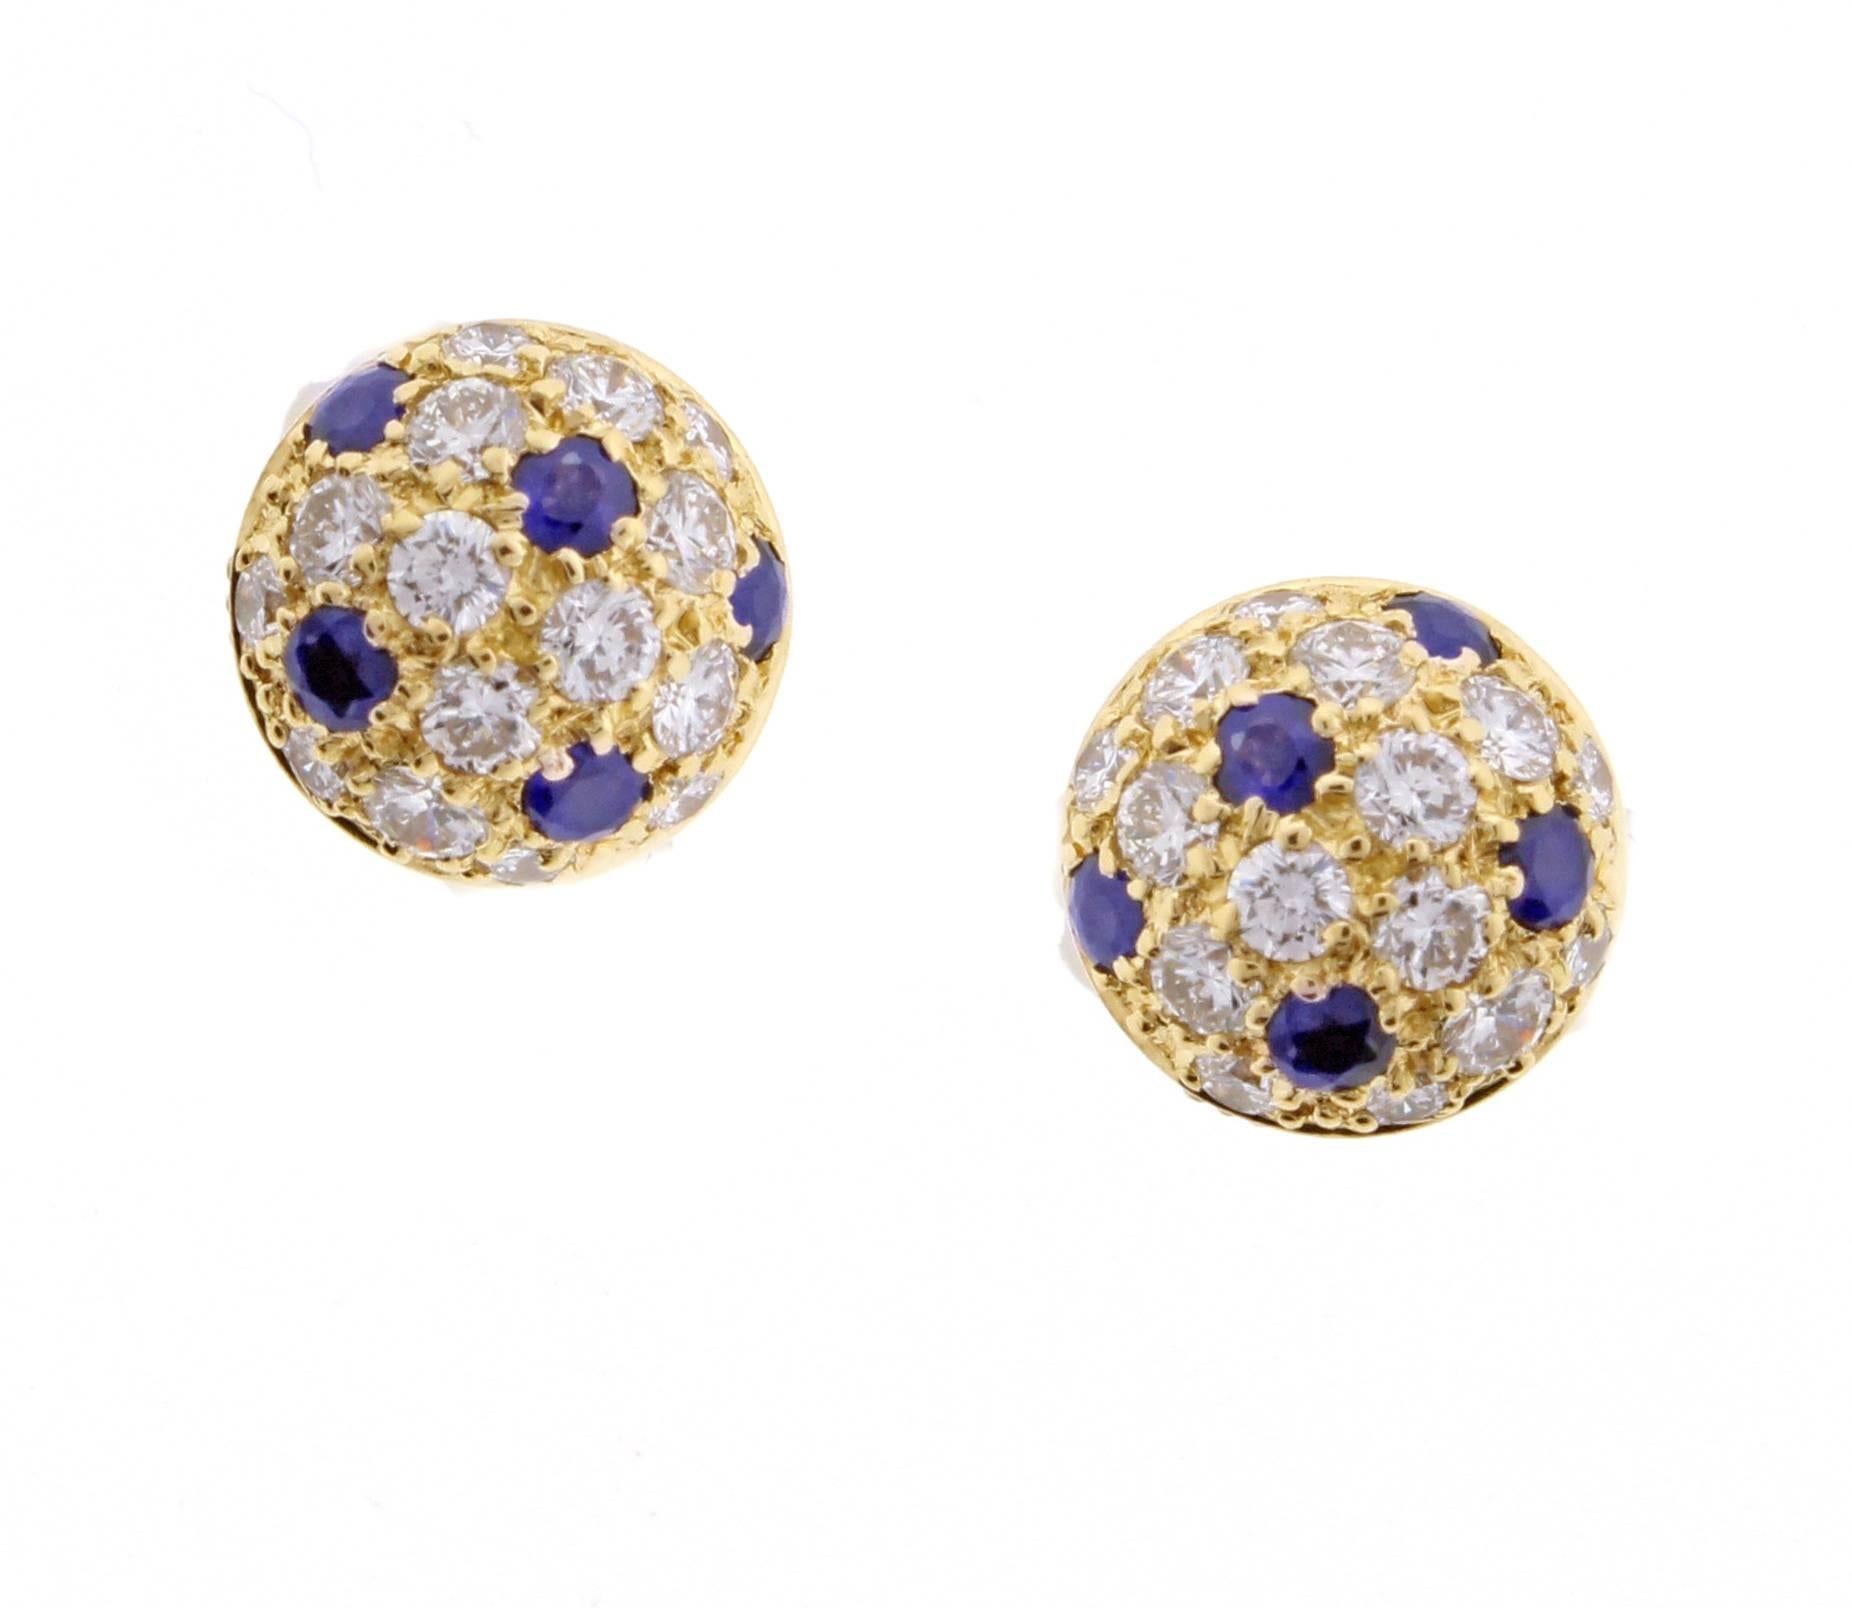 From Cartier, half spheres of pavé set sapphires and shimmering diamonds. Set in 18 karat with .70 carats of diamond and .60 carats of sapphires. 3/8 of an inch in diameter 